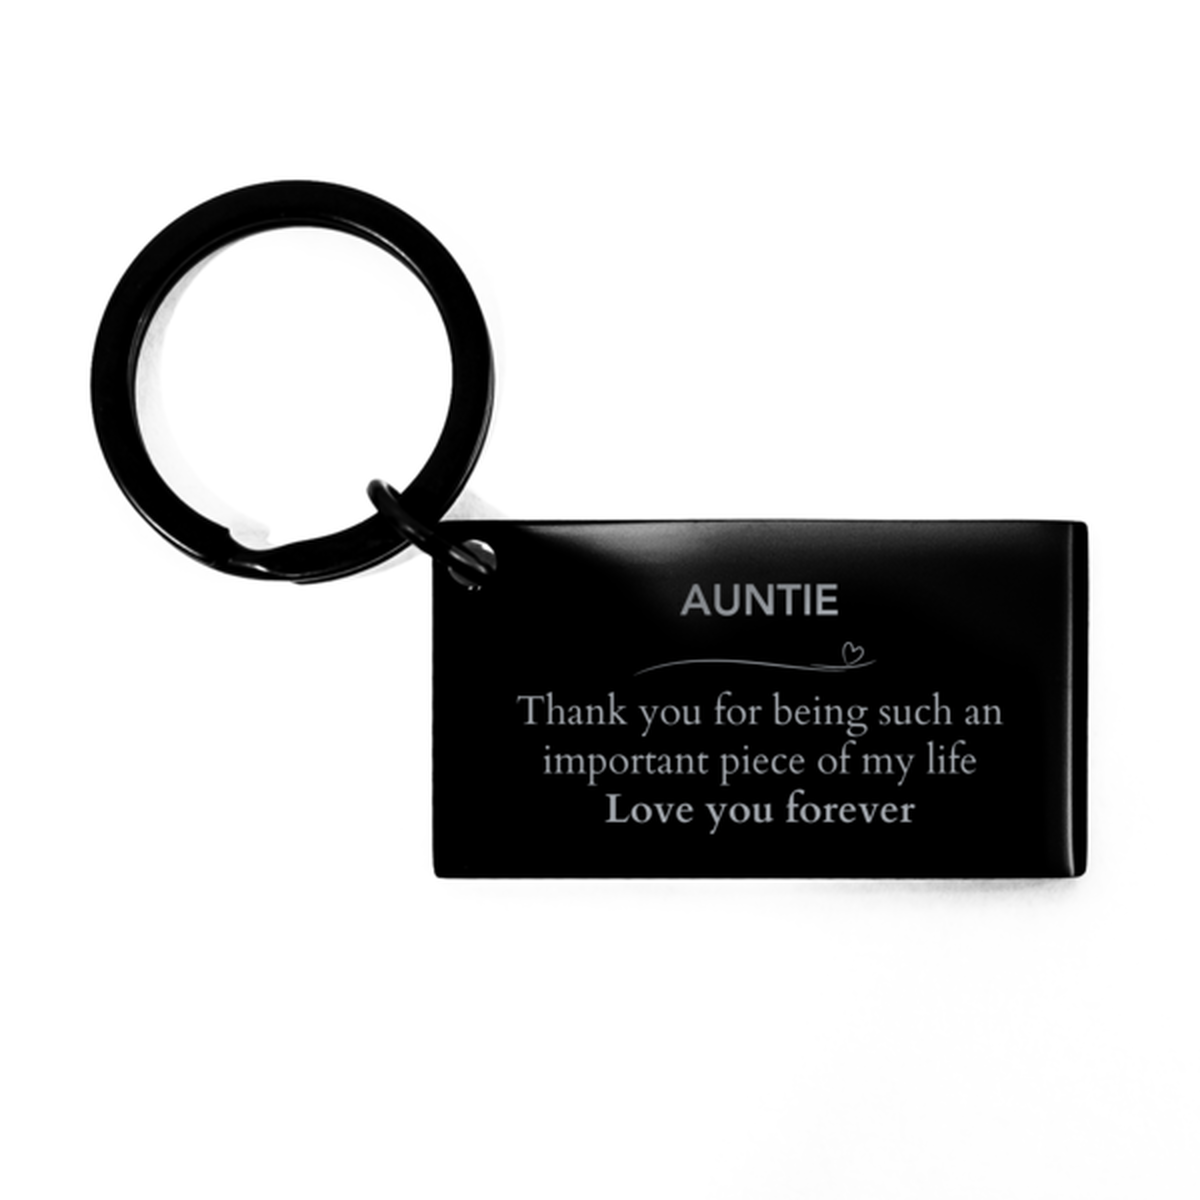 Appropriate Auntie Keychain Epic Birthday Gifts for Auntie Thank you for being such an important piece of my life Auntie Christmas Mothers Fathers Day